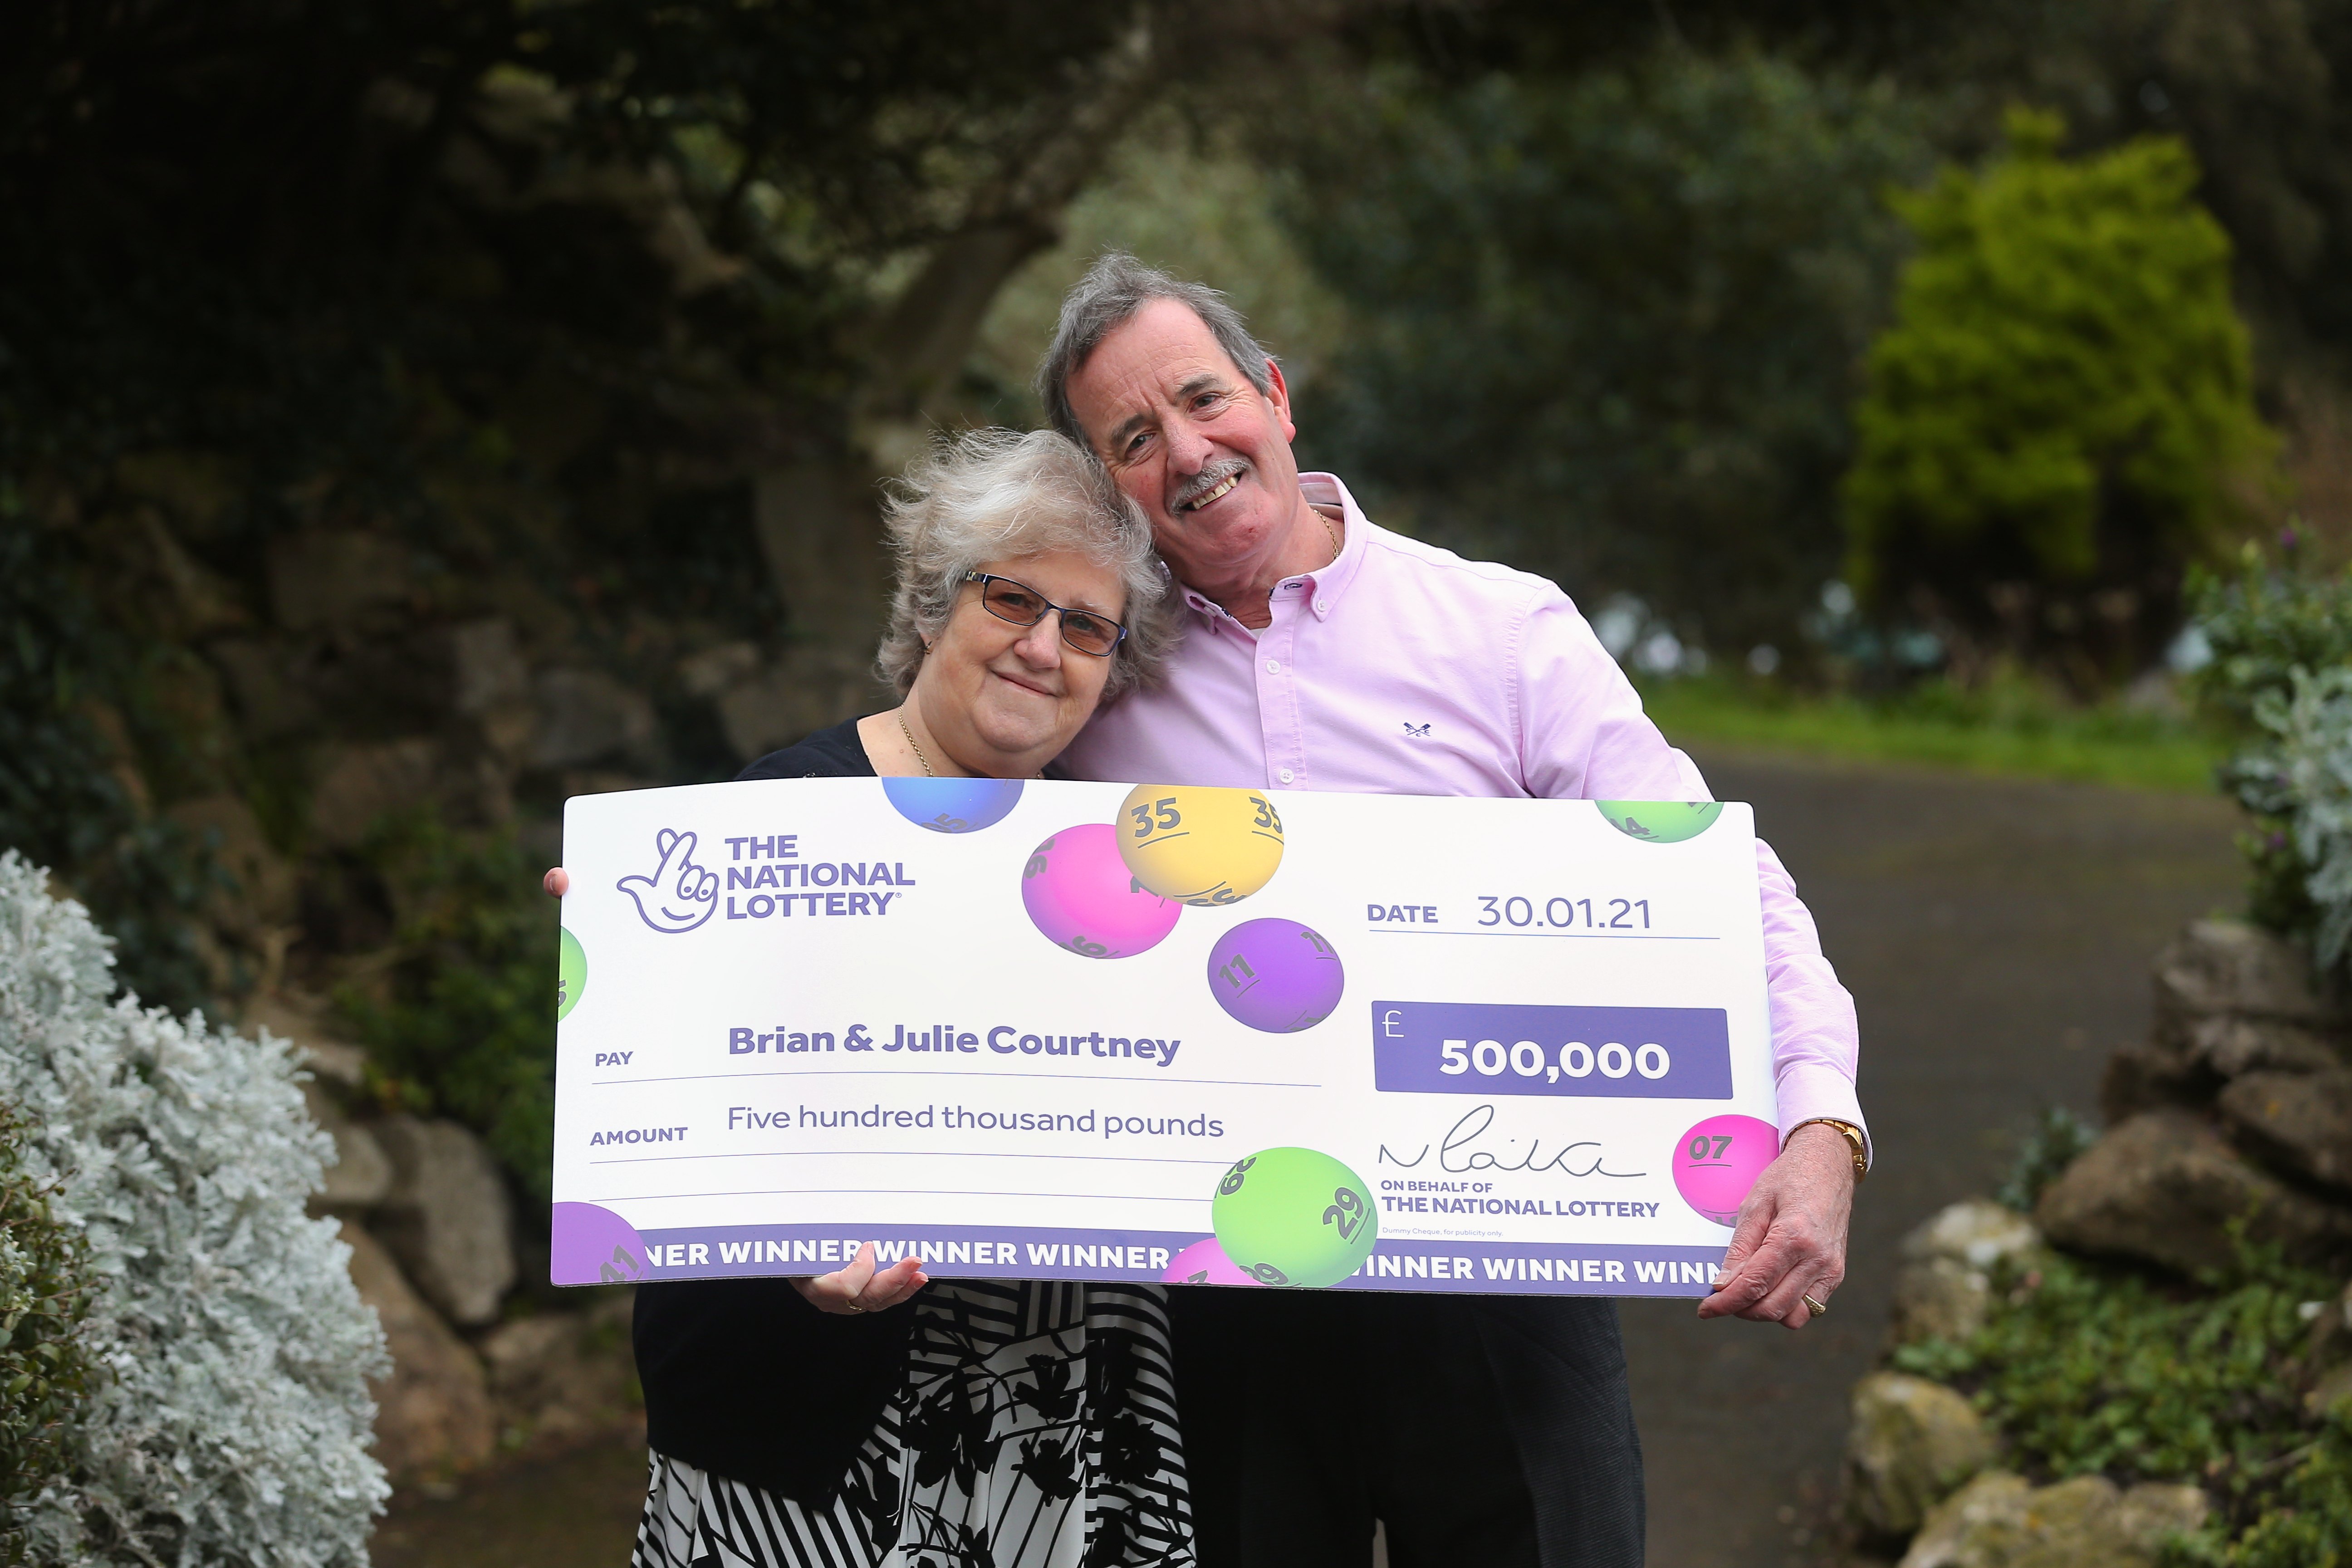 National Lottery Winners Brian and Julie Courtney of Weston Super Mare, Somerset, UK celebrate their £500,000 win